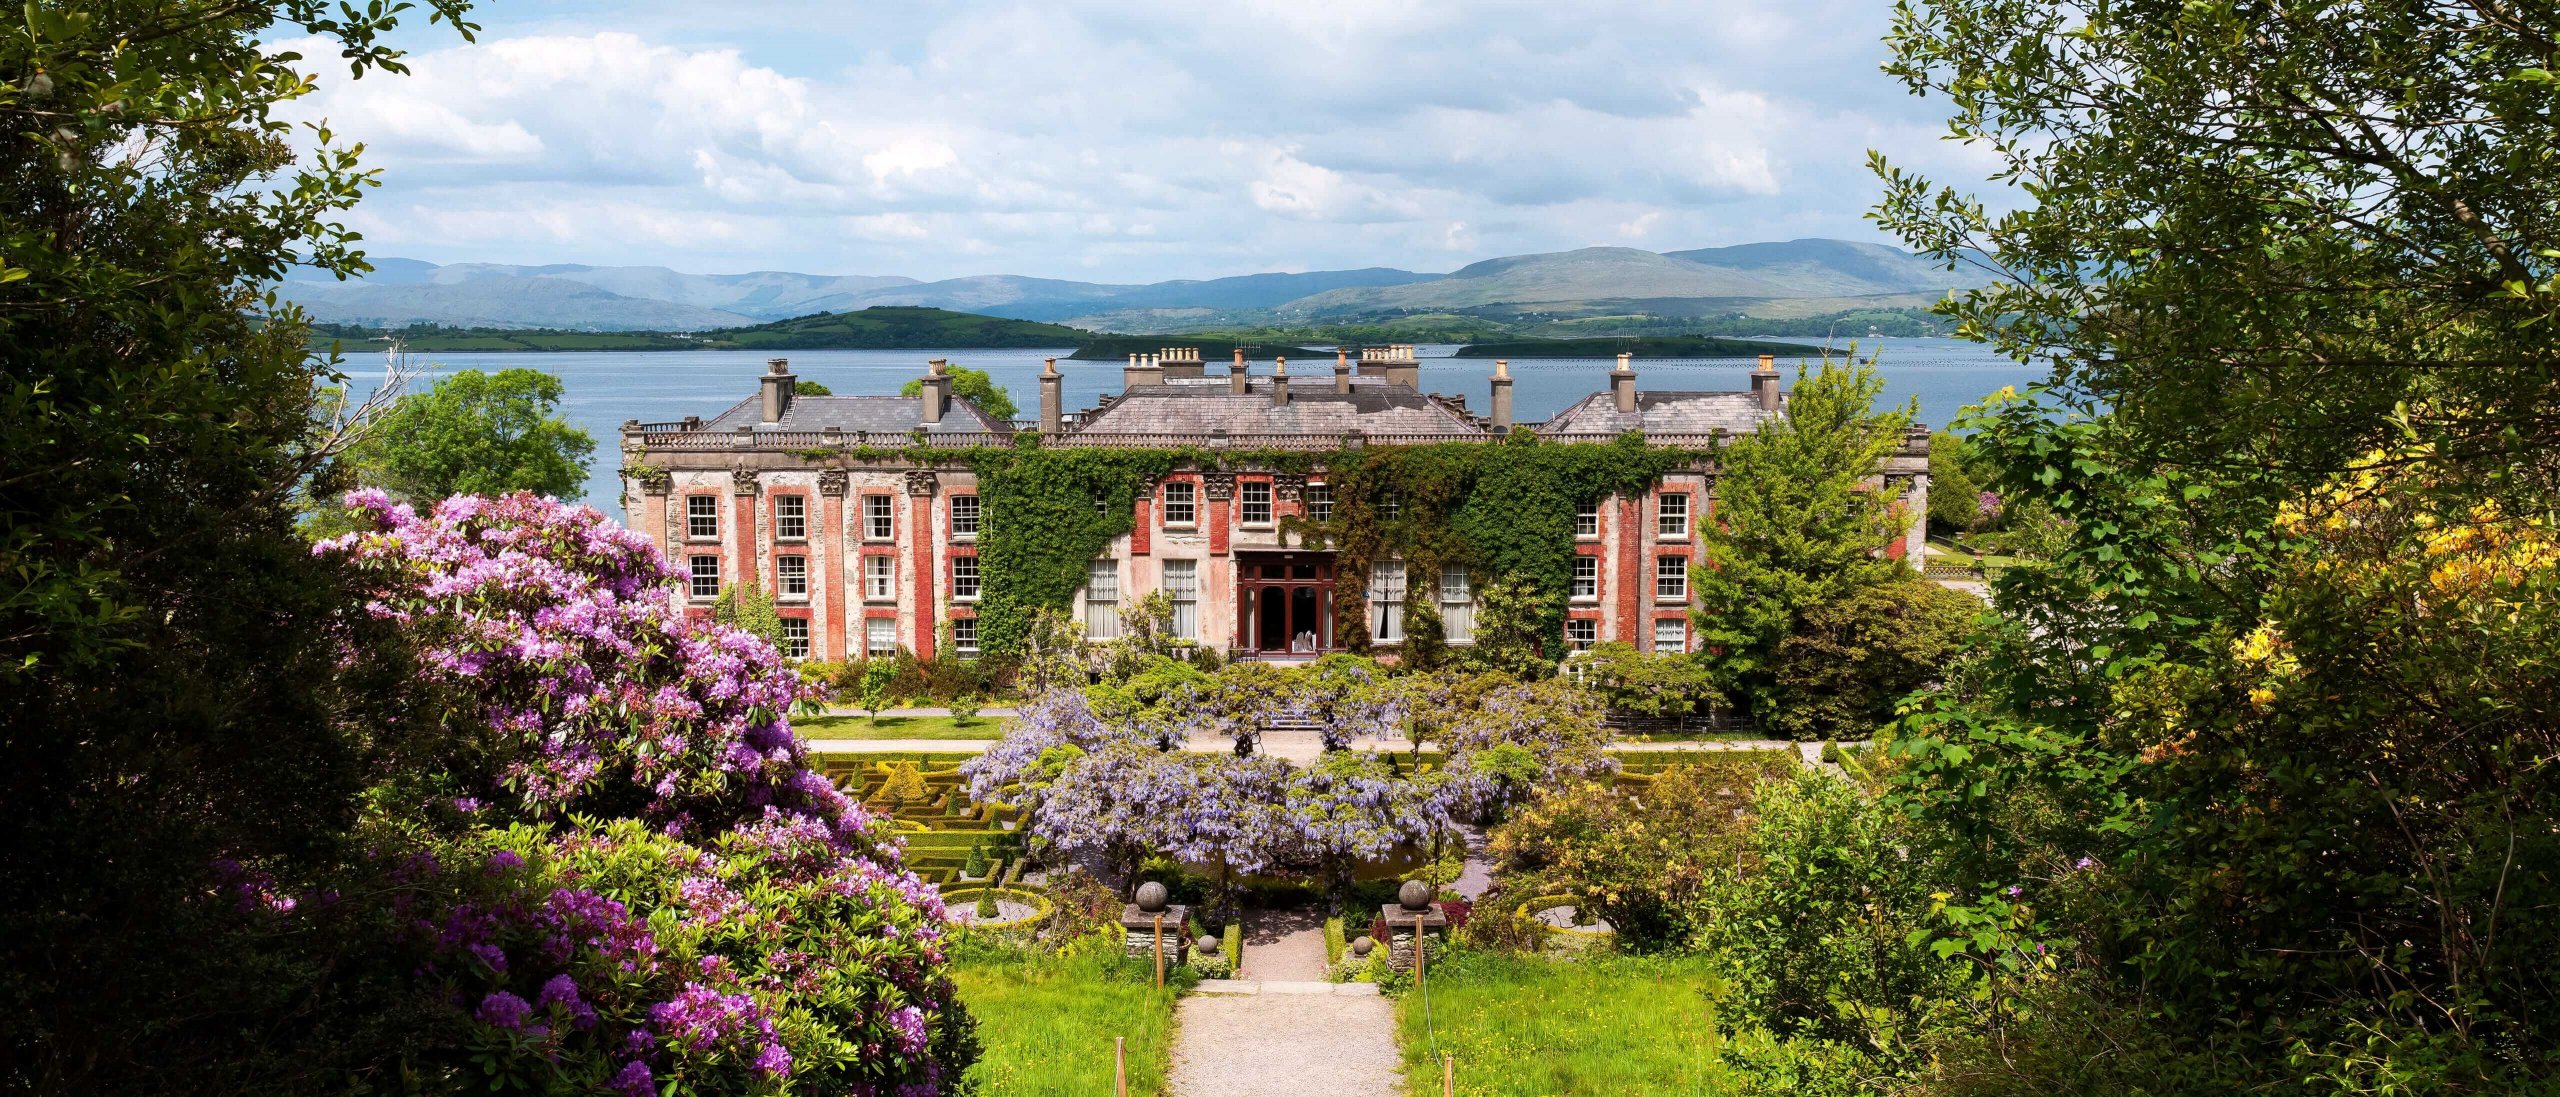 Scenic setting of 18th century Bantry House and Garden in West Cork, Ireland